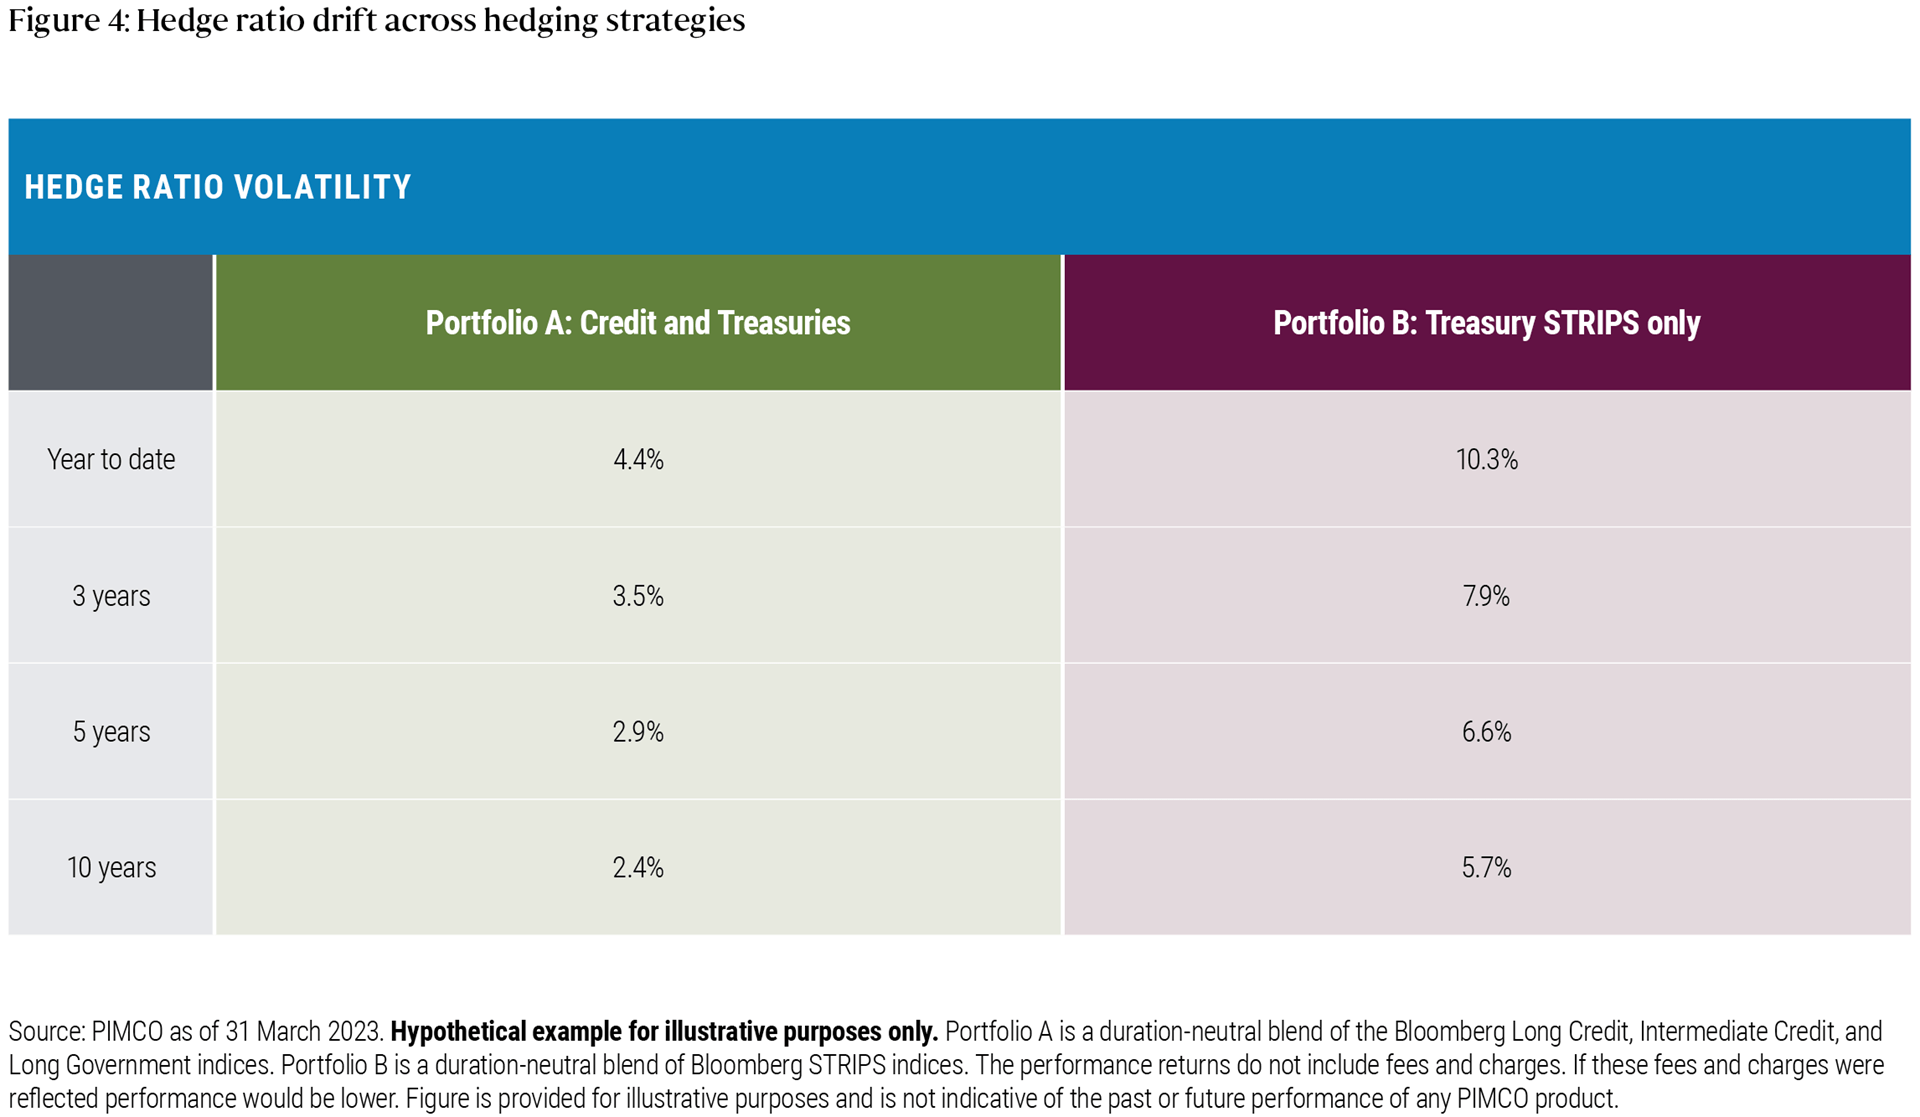 Figure 4 is a table illustrating the hedge ratio volatility for two different hedging strategies: Portfolio A and Portfolio B. Portfolio A is a duration-neutral blend of the Bloomberg Long Credit, Intermediate Credit, and Long Government indices, while Portfolio B is a duration-neutral blend of Bloomberg STRIPS indices. The chart shows that STRIPS-only strategies, represented by Portfolio B, tend to create much more volatile hedging outcomes compared to a portfolio designed to match liabilities across key risk factors, represented by Portfolio A. This increased volatility can result in a more frequent need for rebalancing and trading, leading to additional transaction costs. The chart is provided for illustrative purposes and is not indicative of the past or future performance of any PIMCO product.